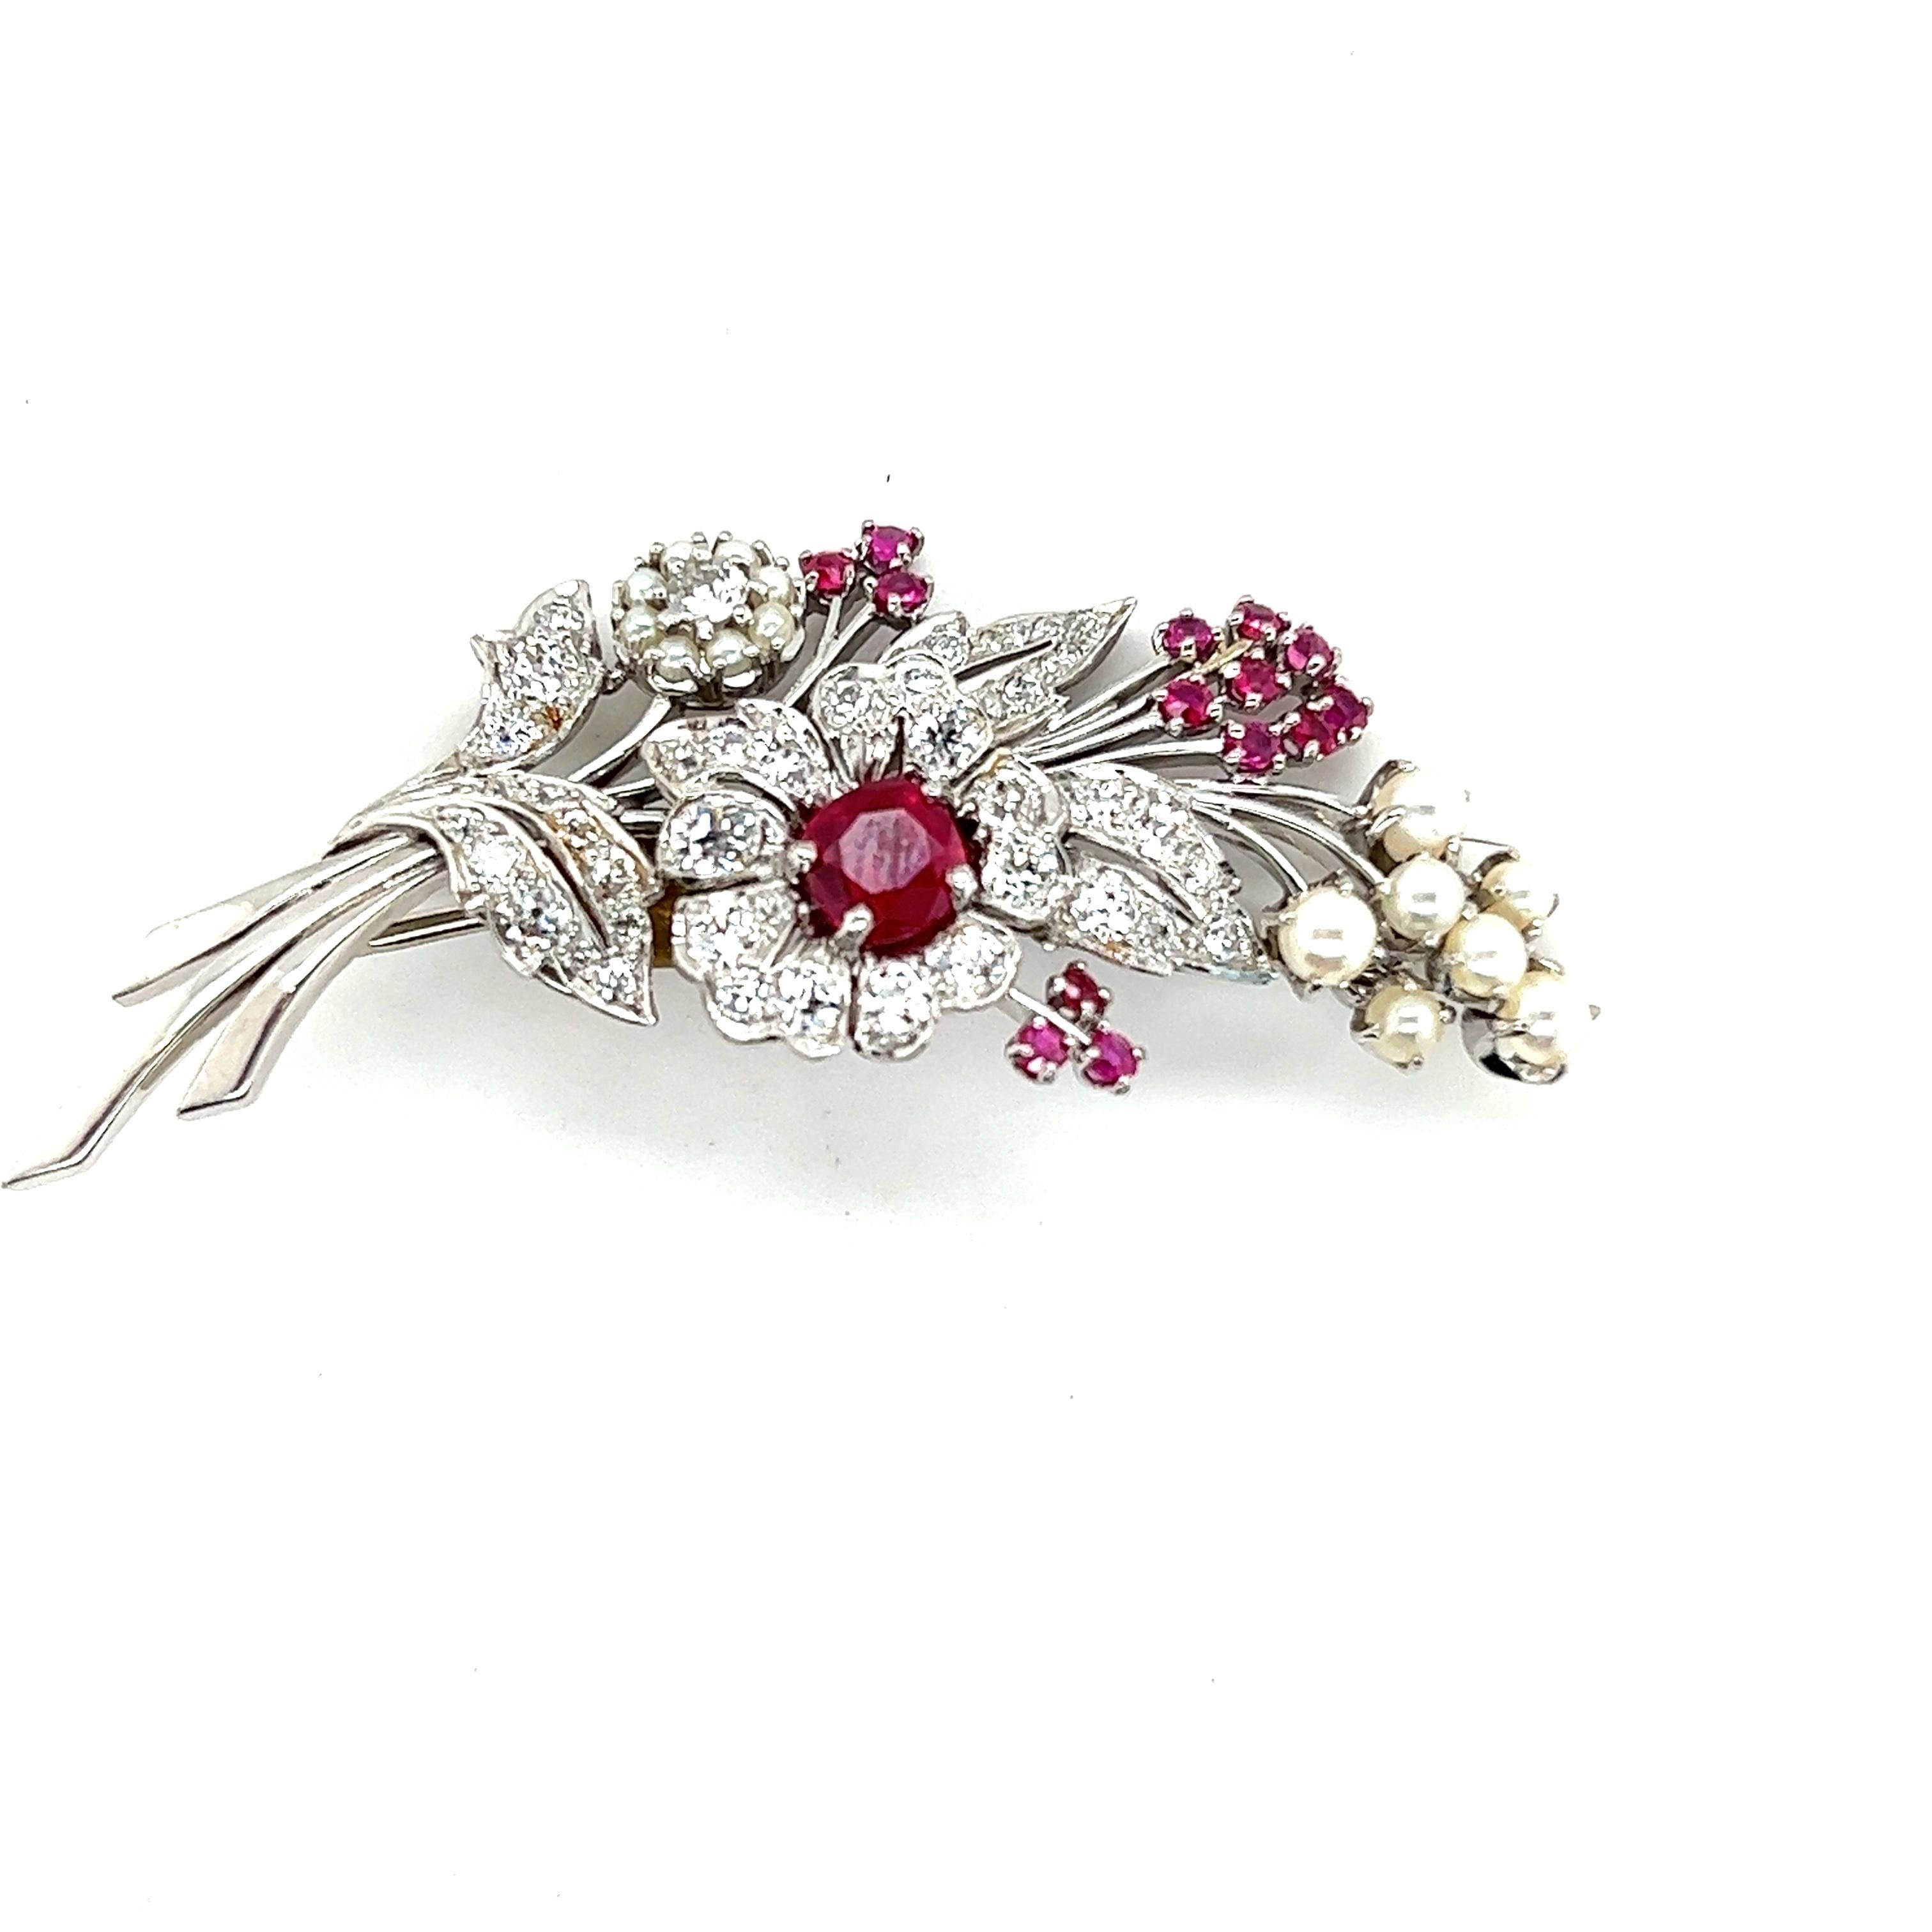 Antique Platinum Ruby, Diamond, and Pearl Spray Brooch, c. 1890 For Sale 1